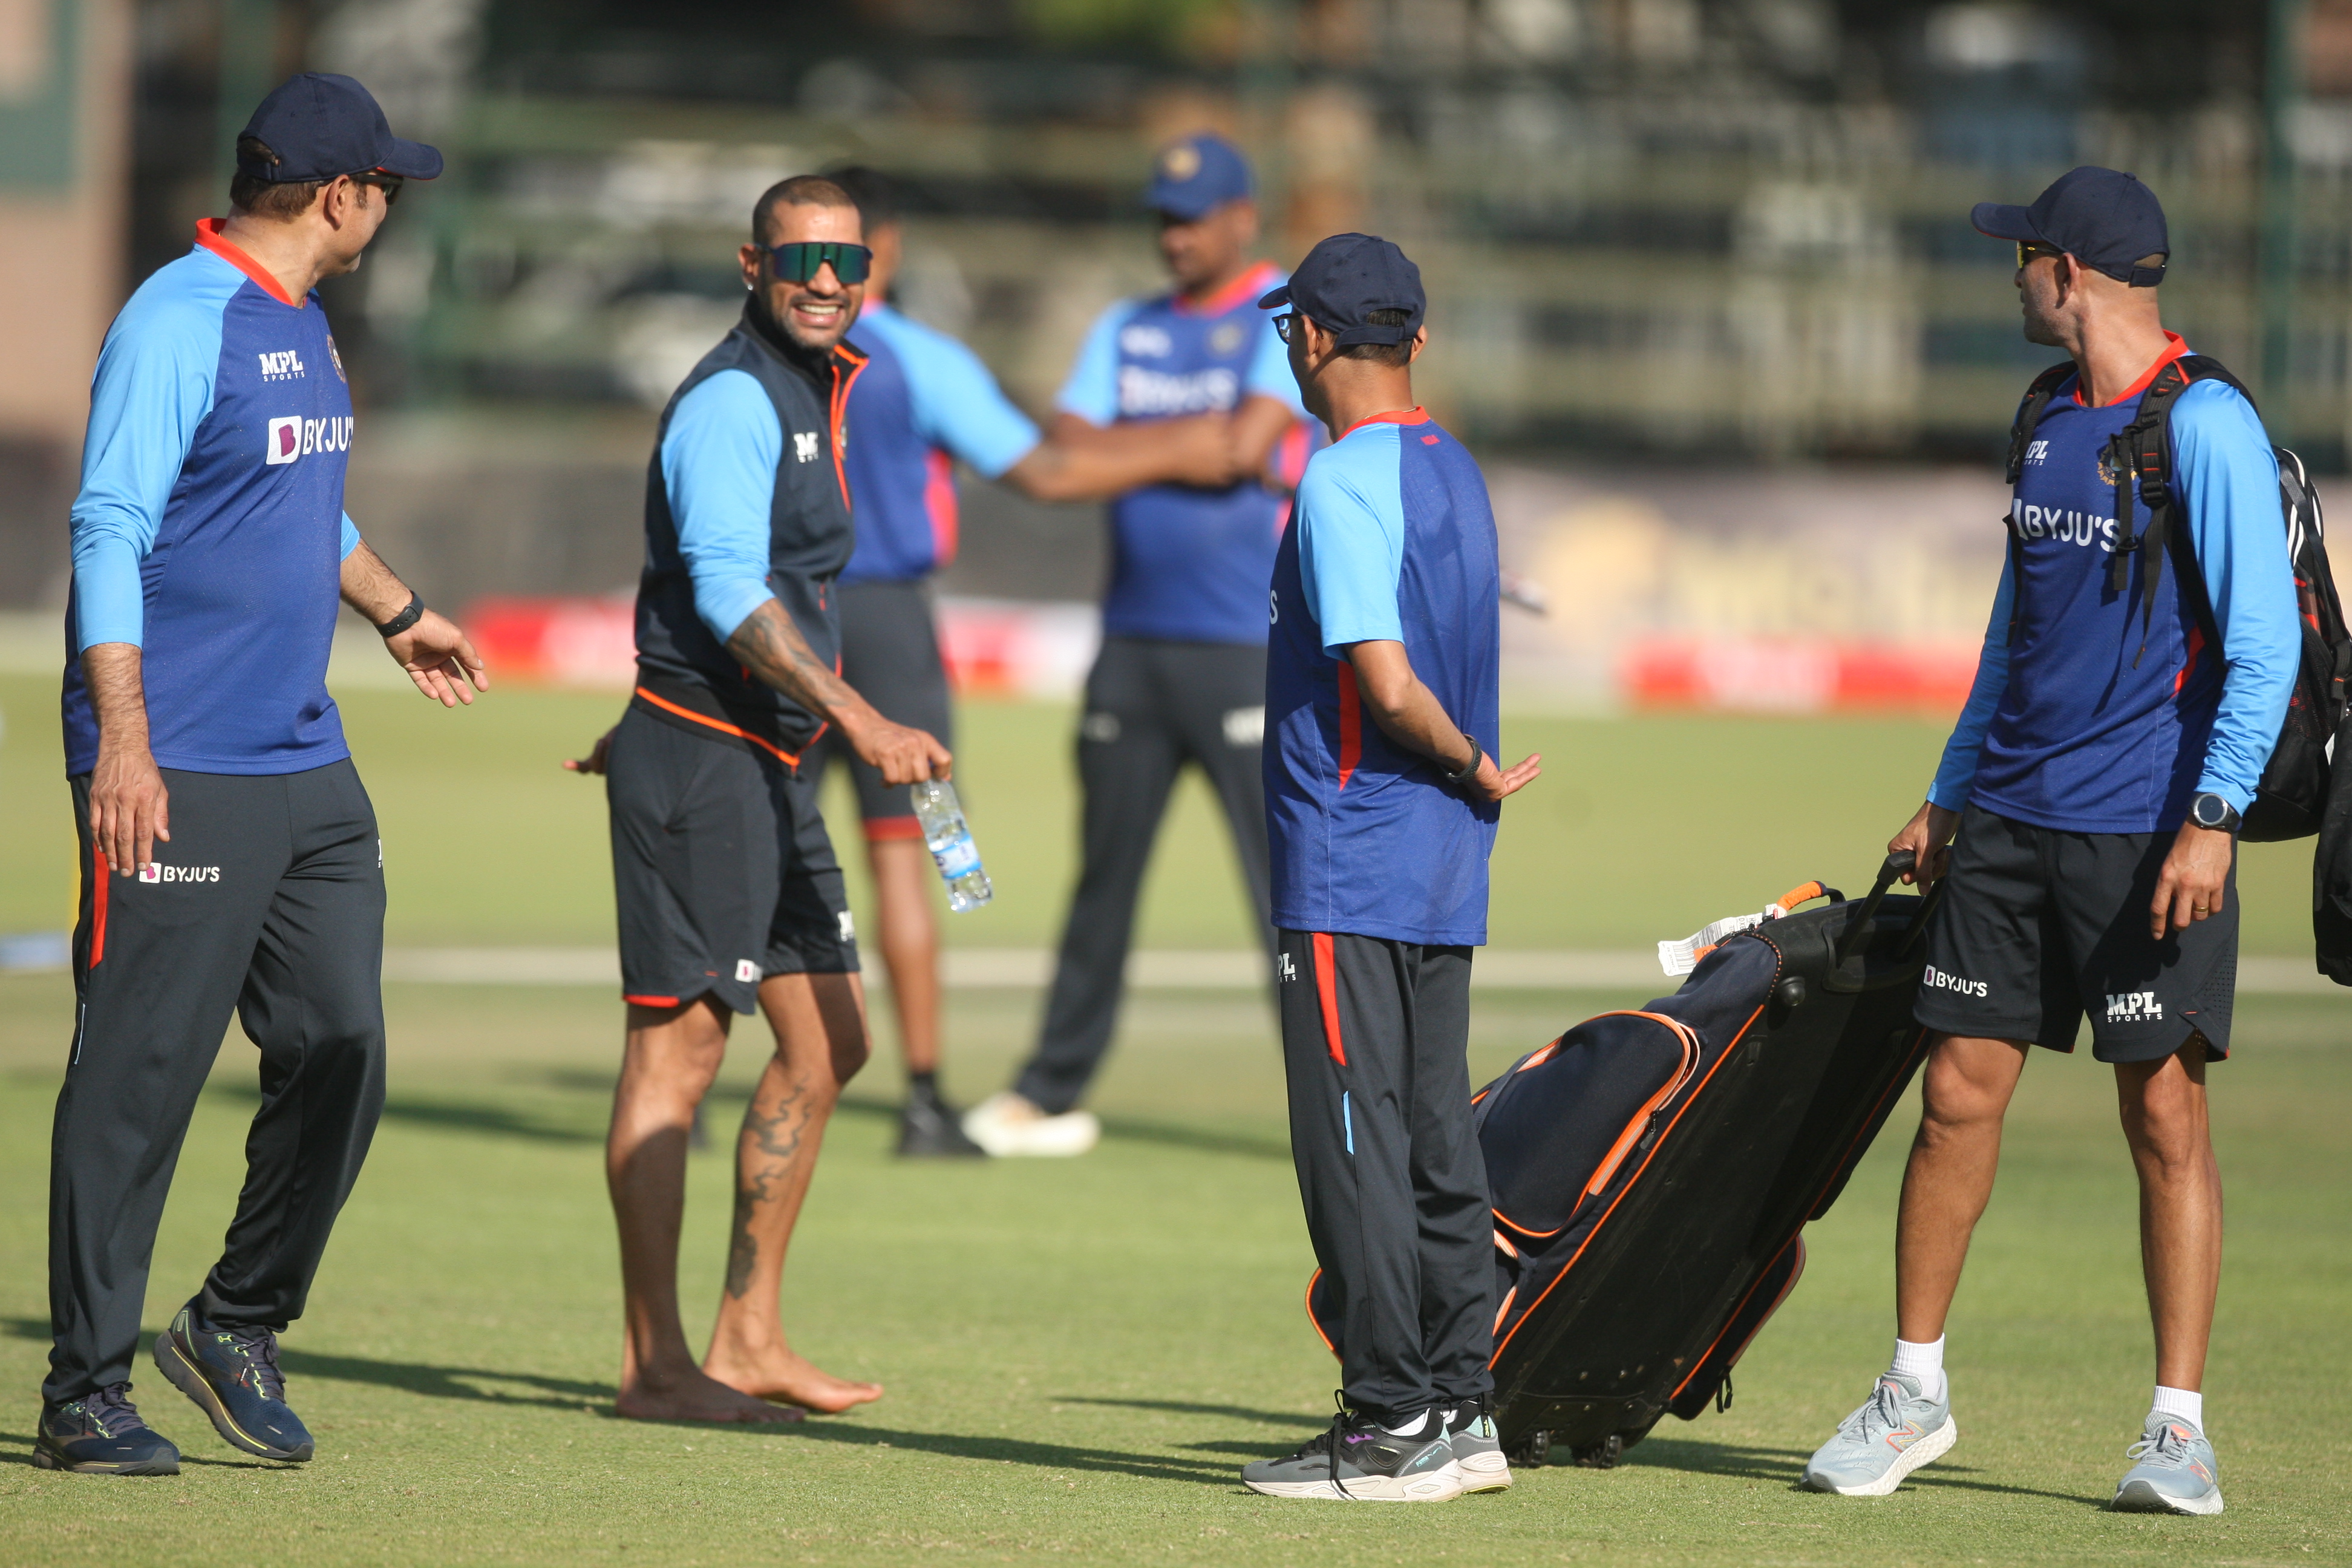 IND vs ZIM LIVE: Team India ALL Smiles ahead of 1st ODI, Rahul Tripathi Takes Look at PITCH ahead of ODI debut - Check Pics